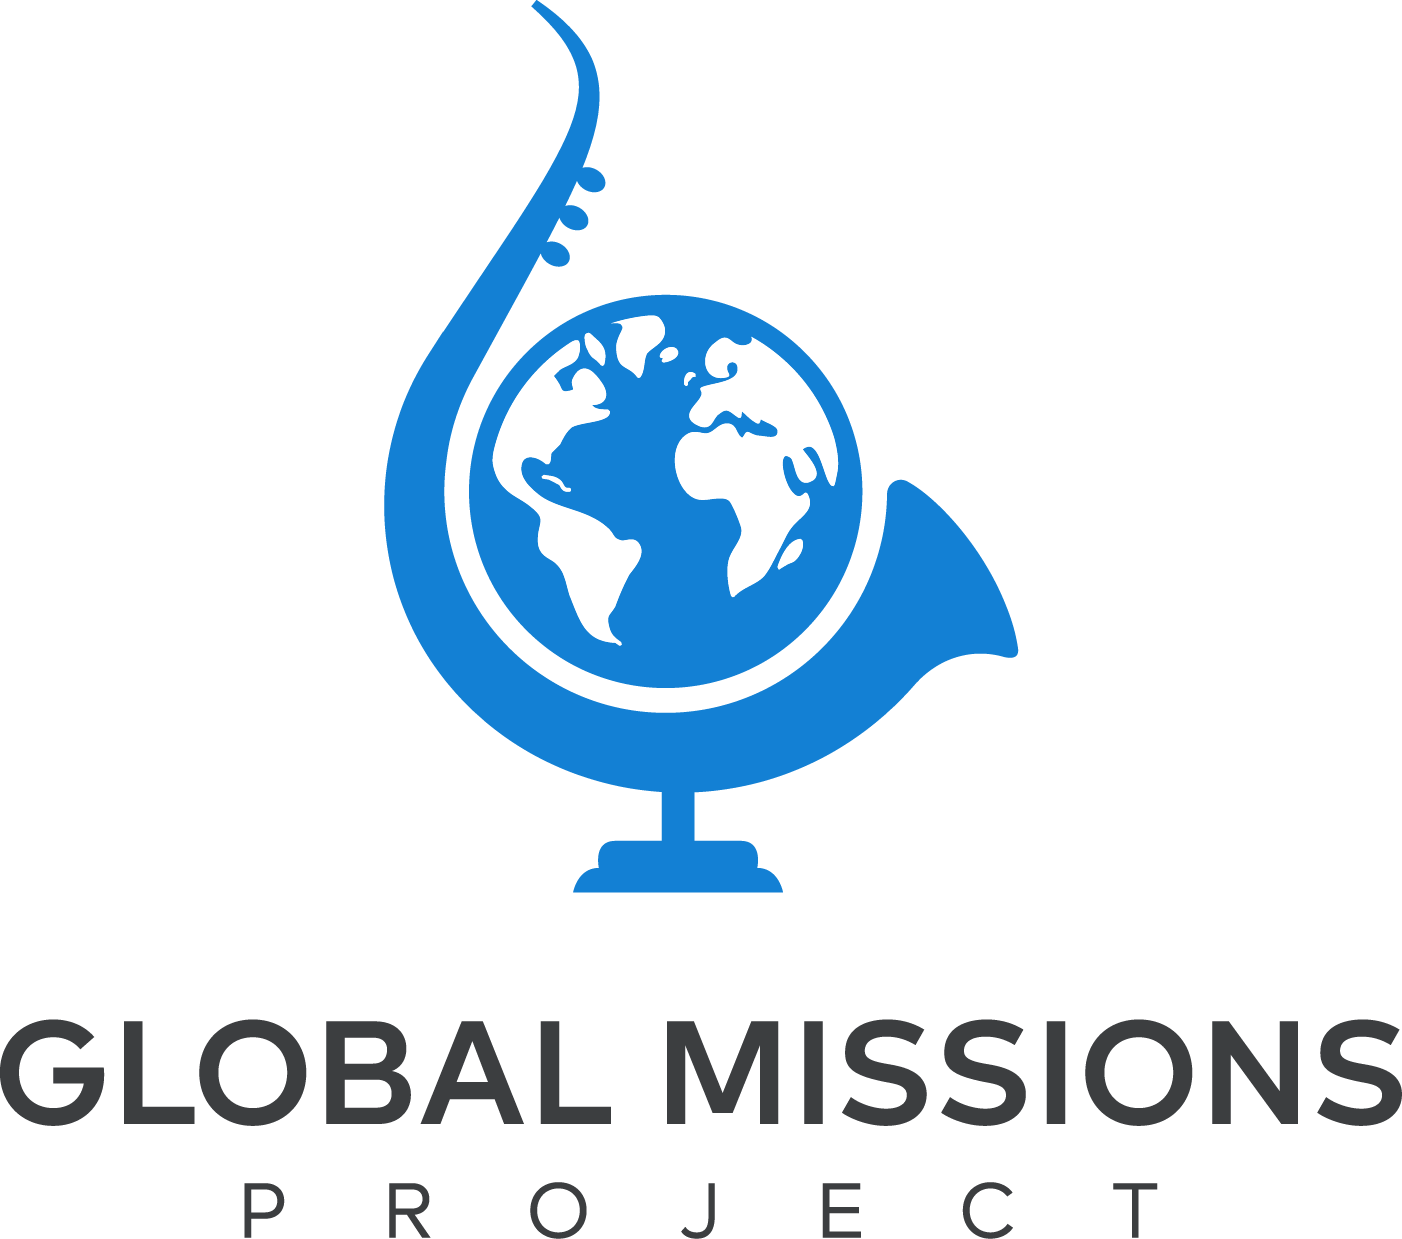 Global Missions Project - Using music to spread the hope of Jesus